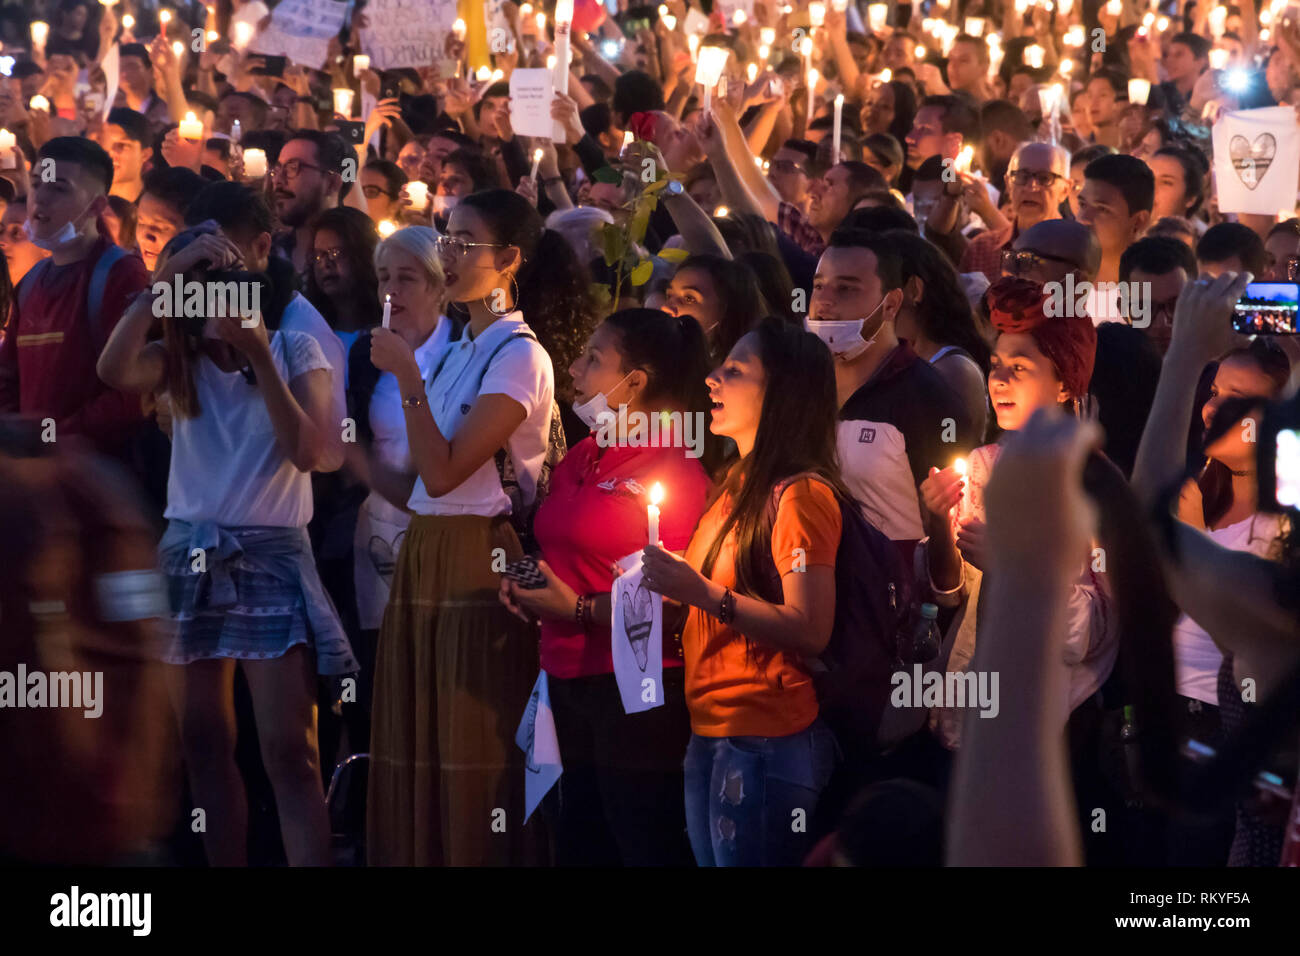 On July 6, 2018, a vigil was held in 25 cities of Colombia and the world as a form of protest for the murder of social leaders in Colombia, which from Stock Photo